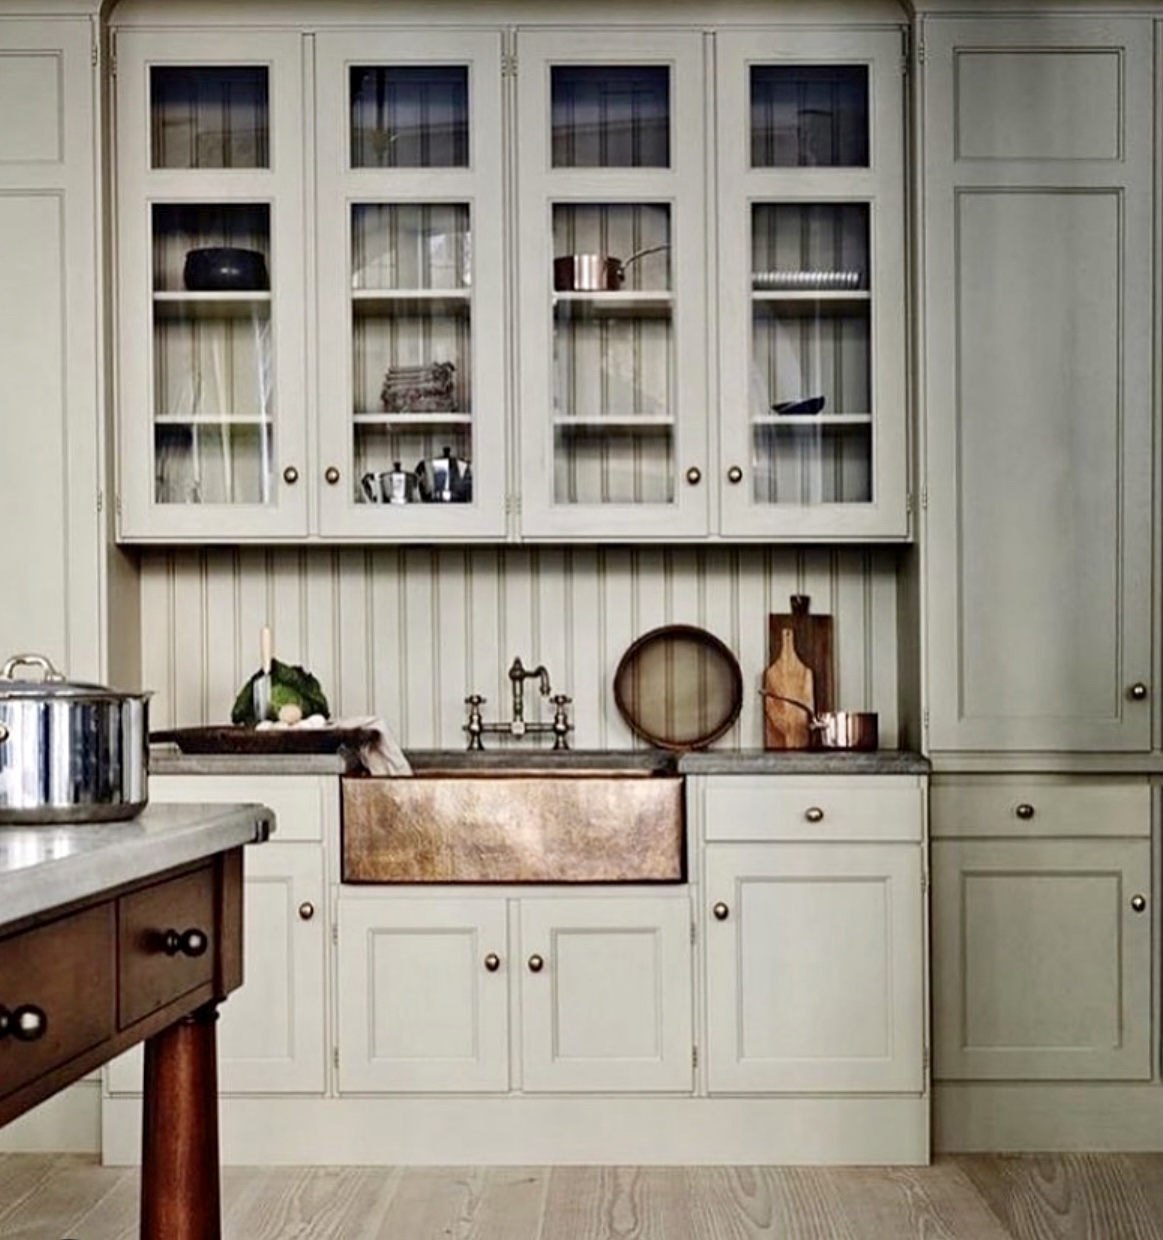 tongue and groove kitchen by kitchenandbeyond.se with copper sink